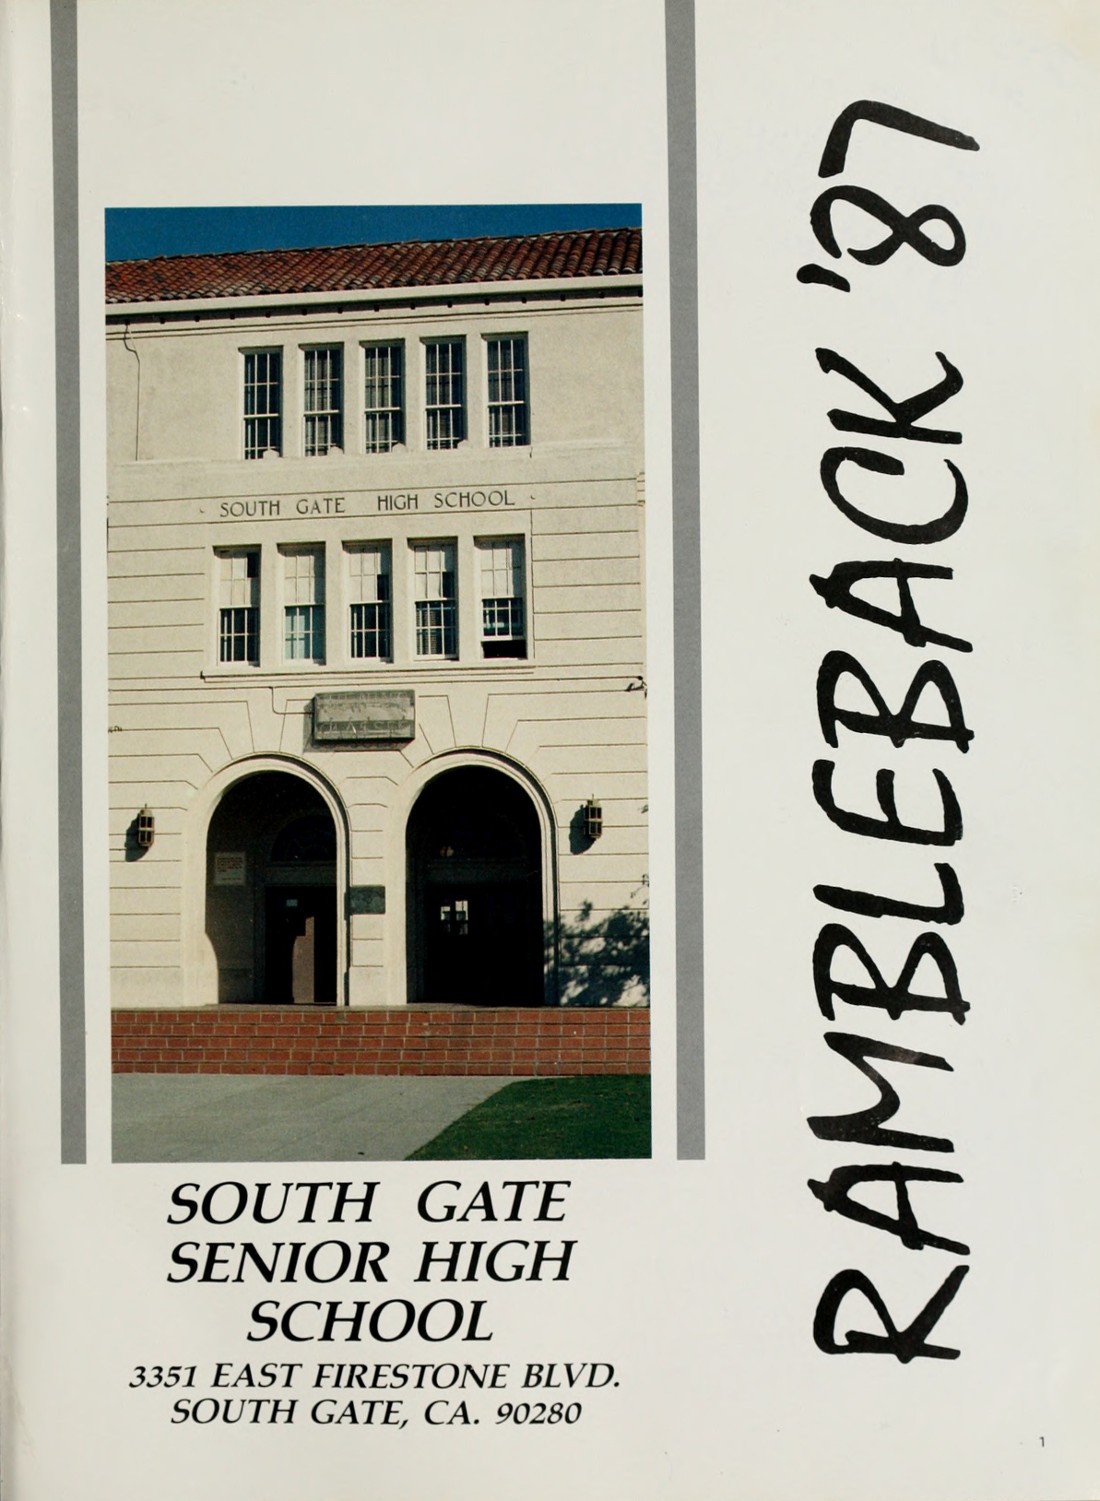 1987 yearbook from South Gate High School from South gate, California